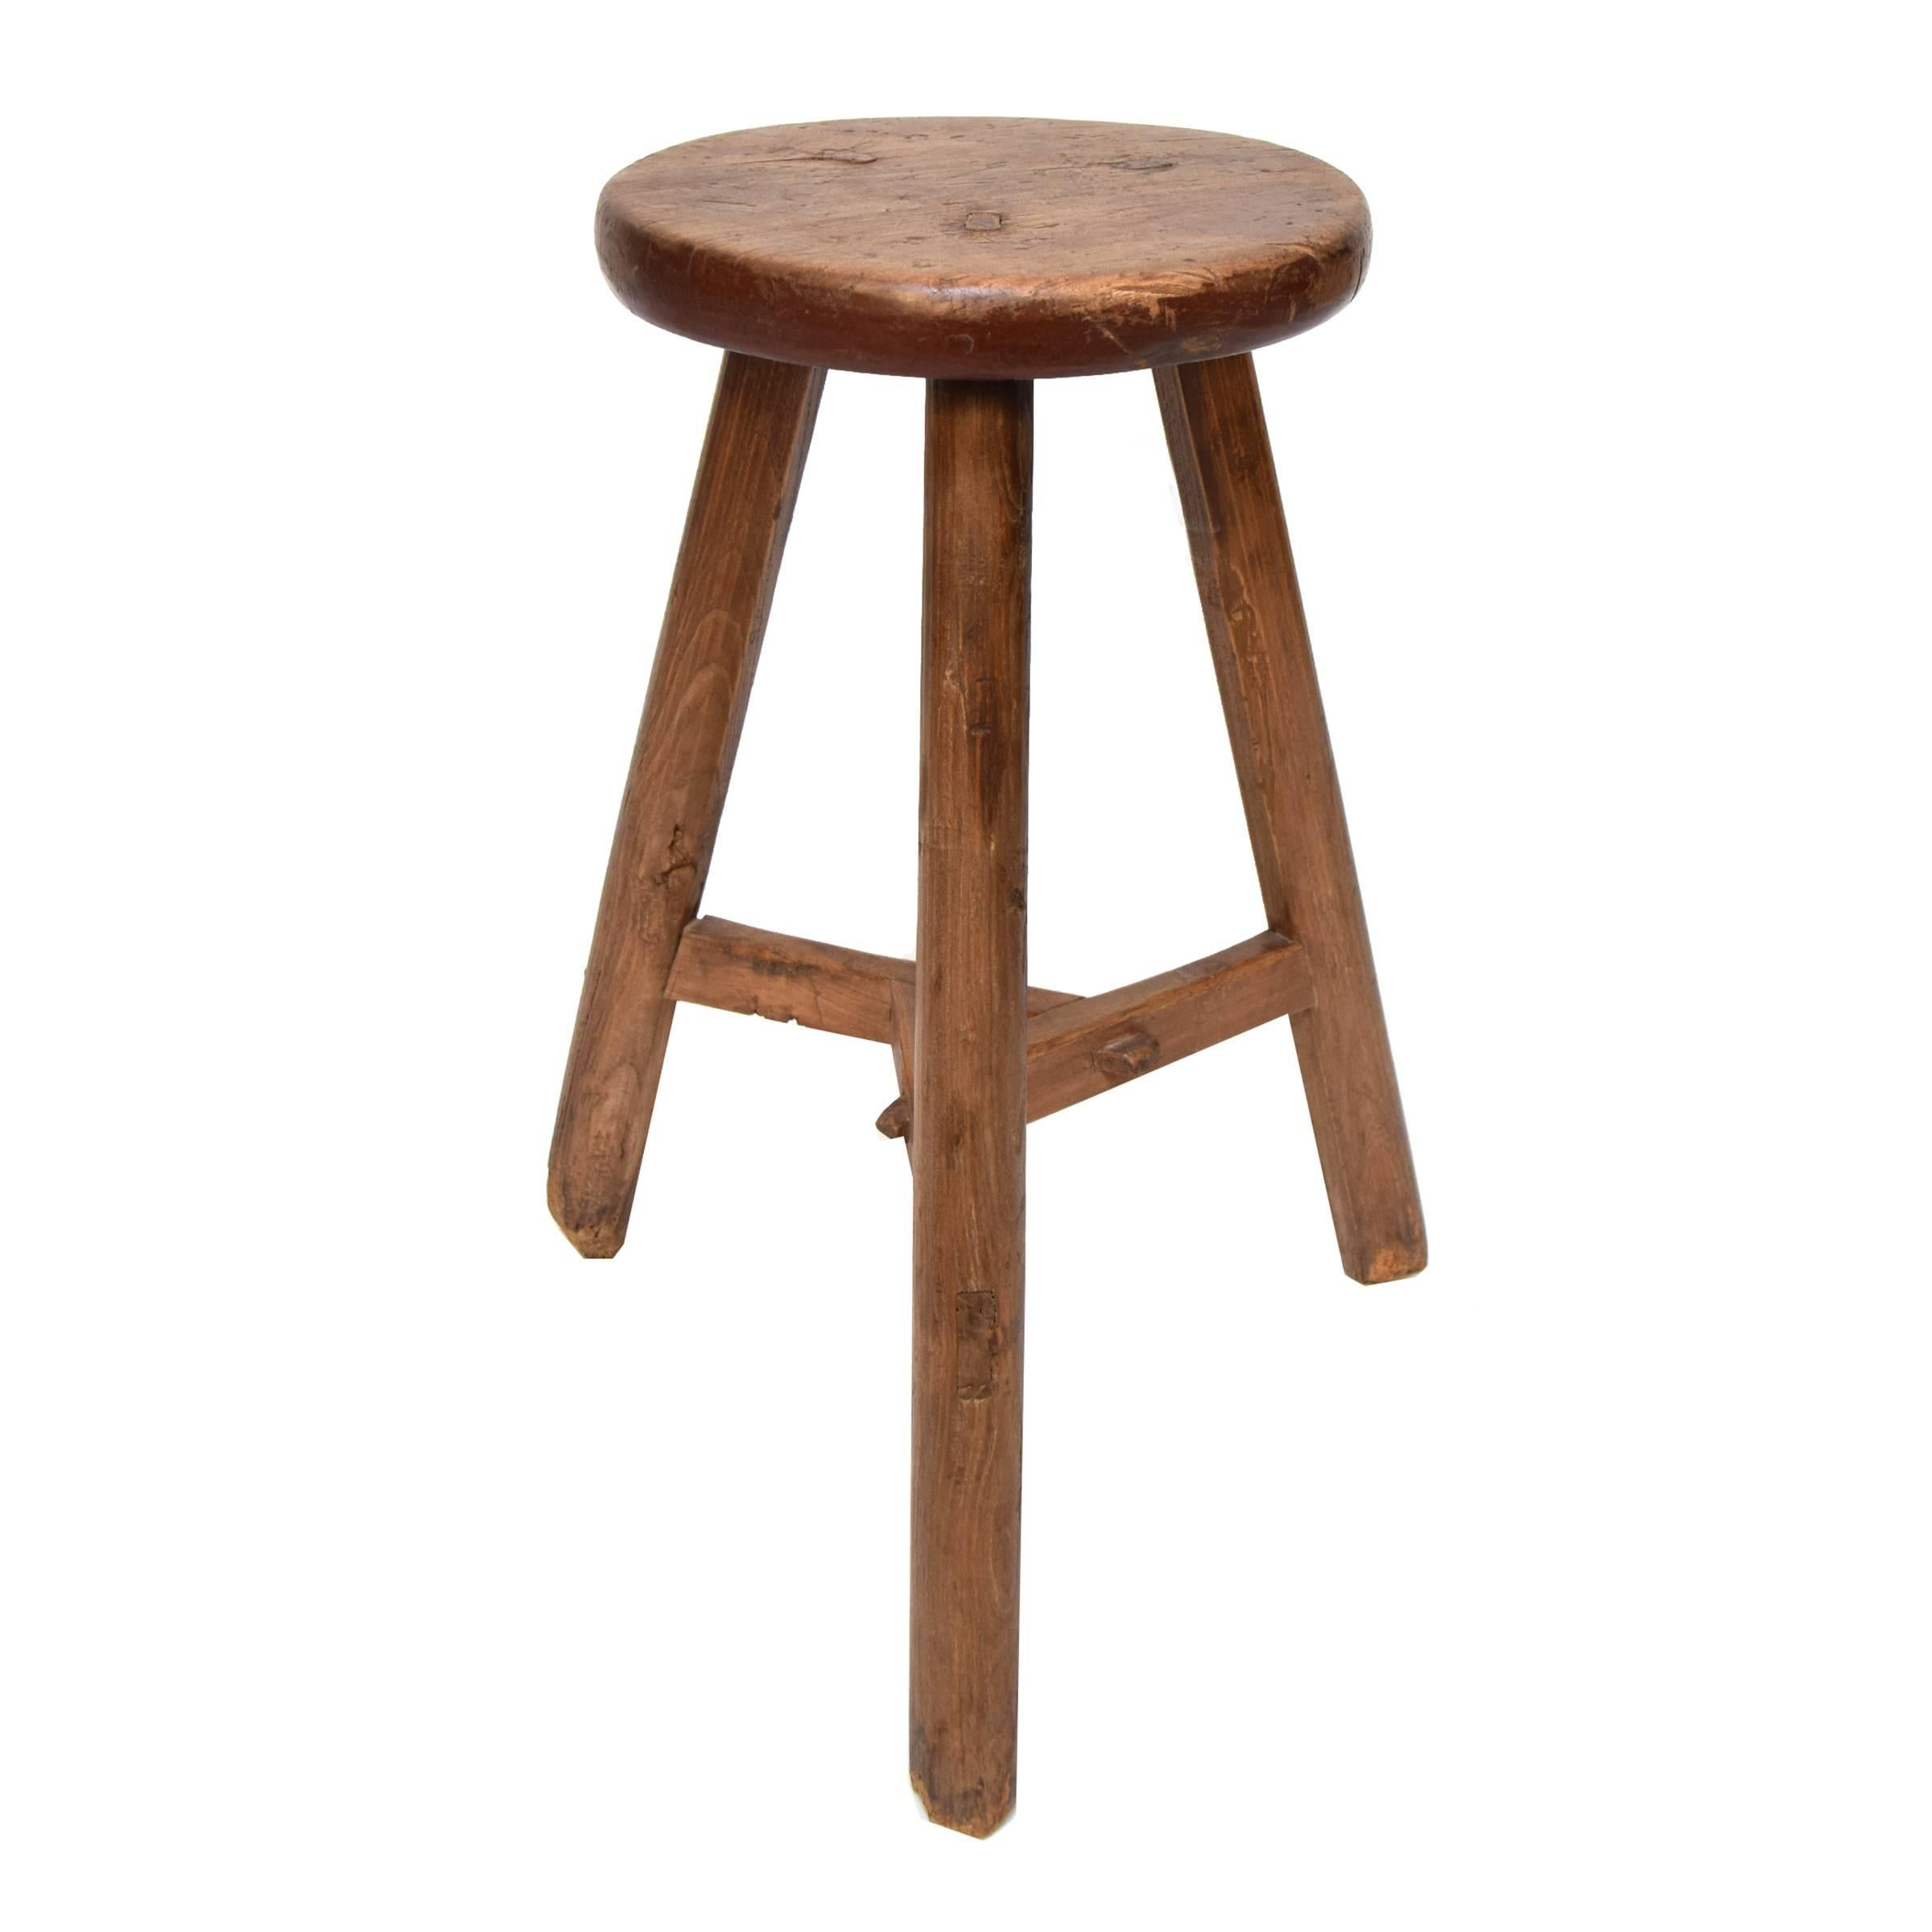 Stools were the most ubiquitous and practical seating found in homes, gardens and shops in China. In the street or the garden, they were easy to carry and move. Used by merchants as seating for themselves and their customers, they have many forms